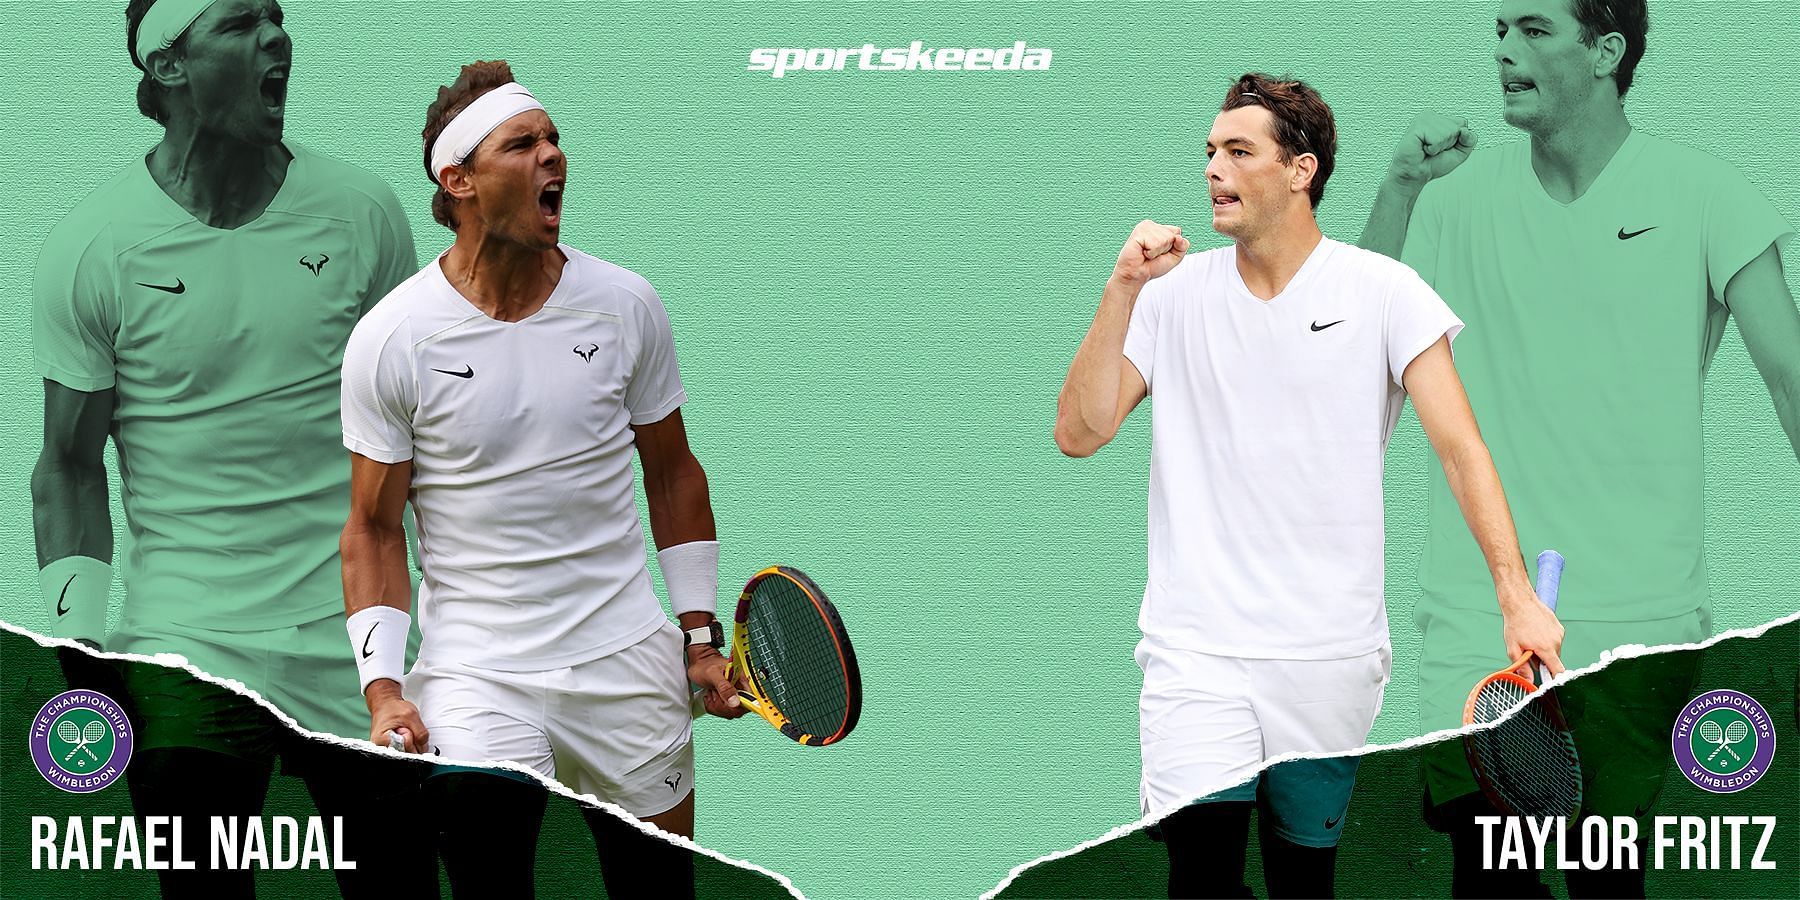 Rafael Nadal takes on Taylor Fritz in the quarterfinals at Wimbledon